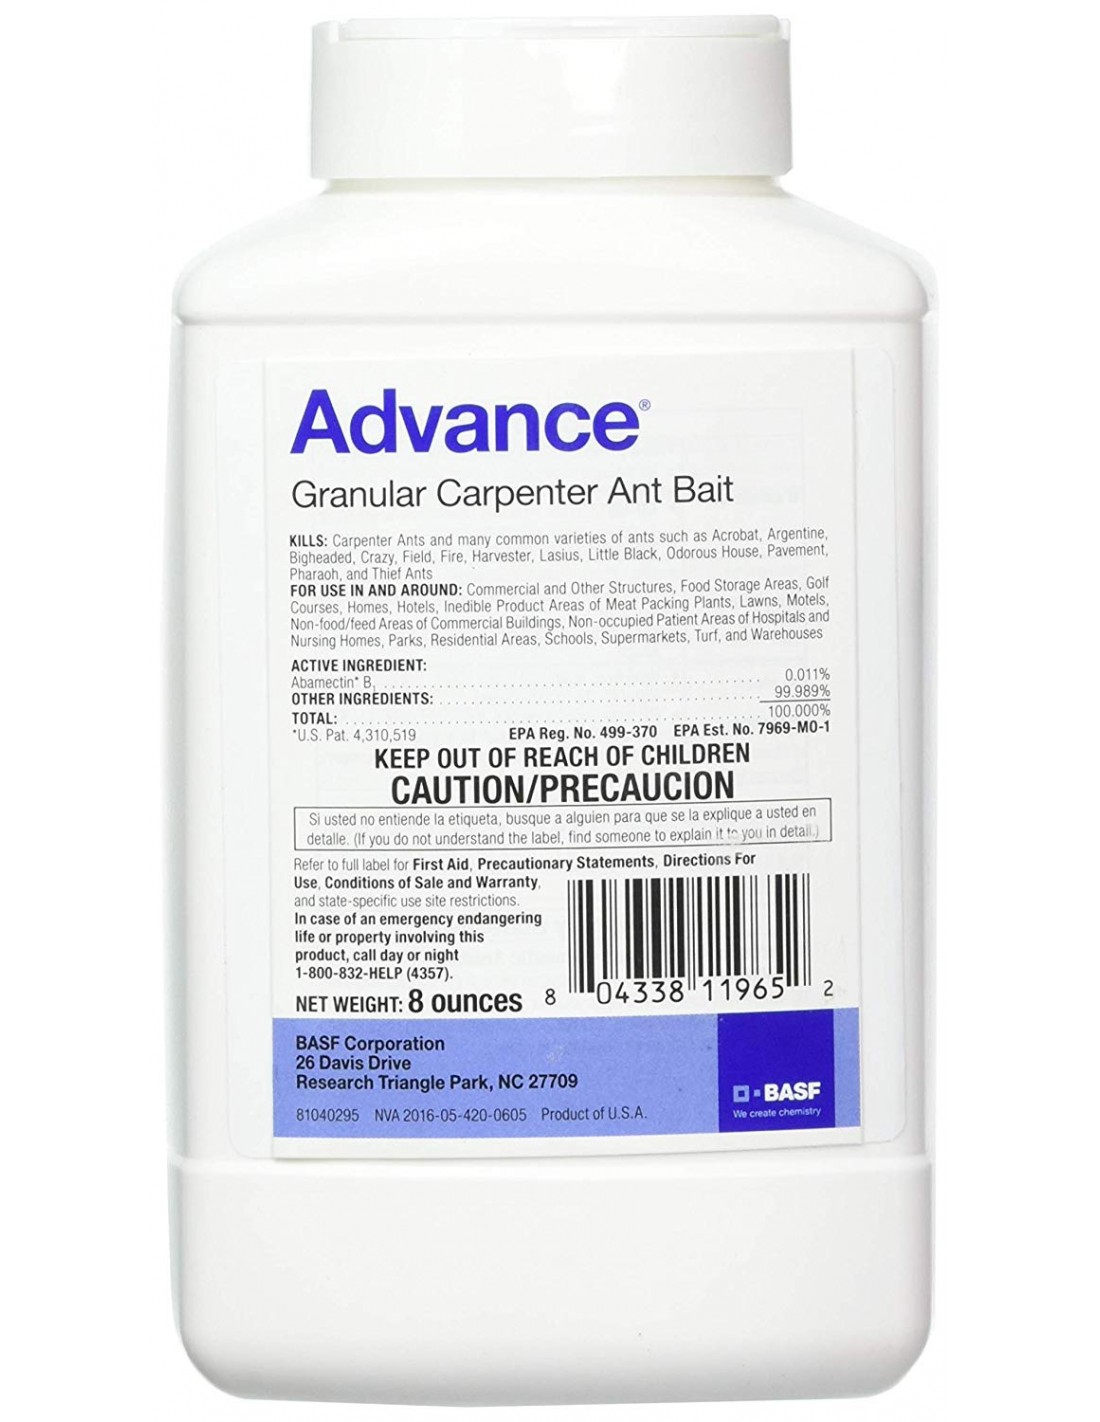 What is the difference between this product and the Advance 375A product?